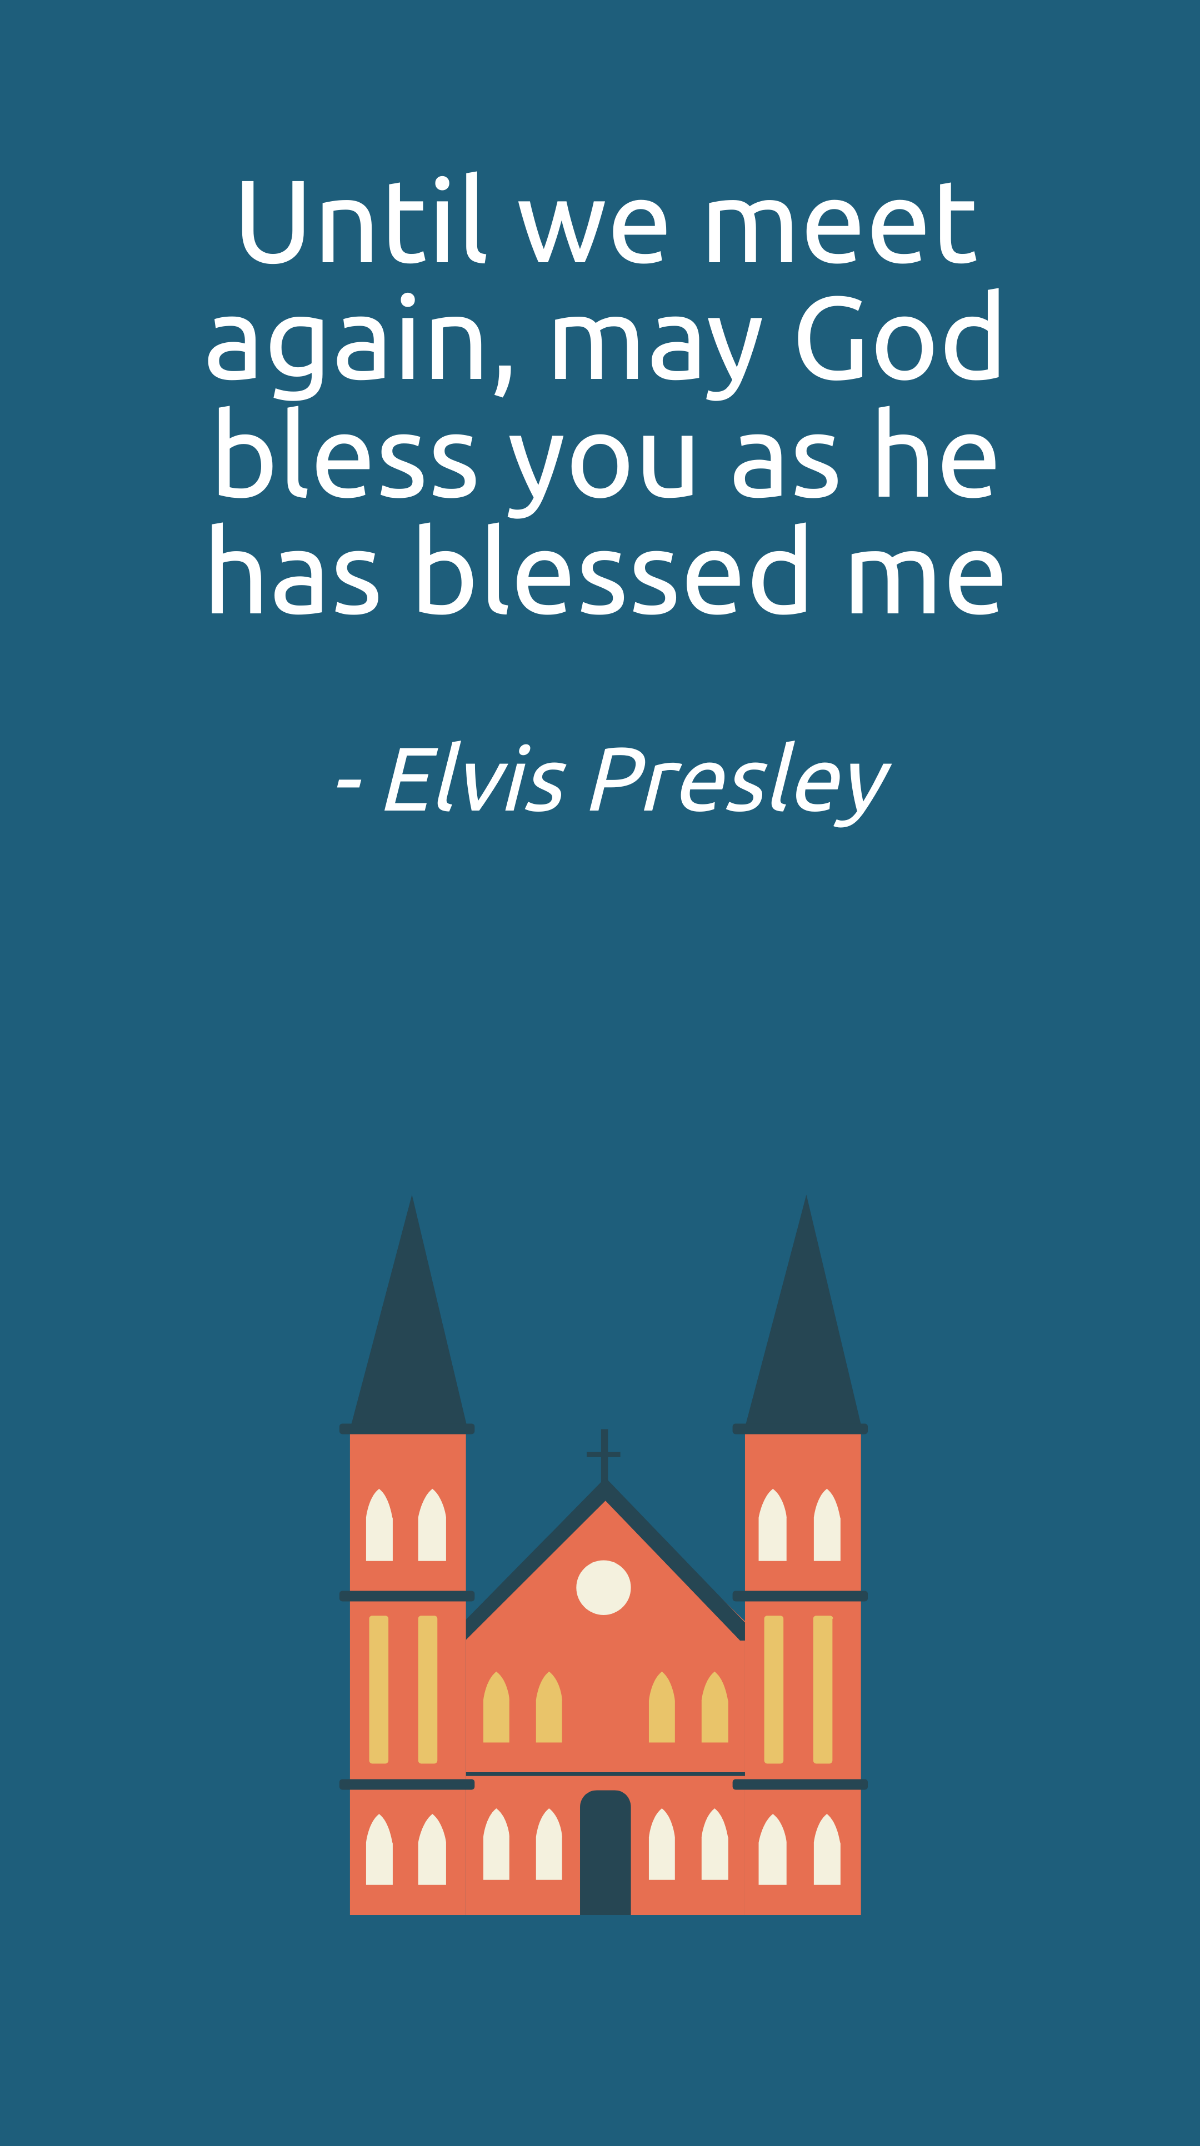 Free Elvis Presley - Until we meet again, may God bless you as he has blessed me Template